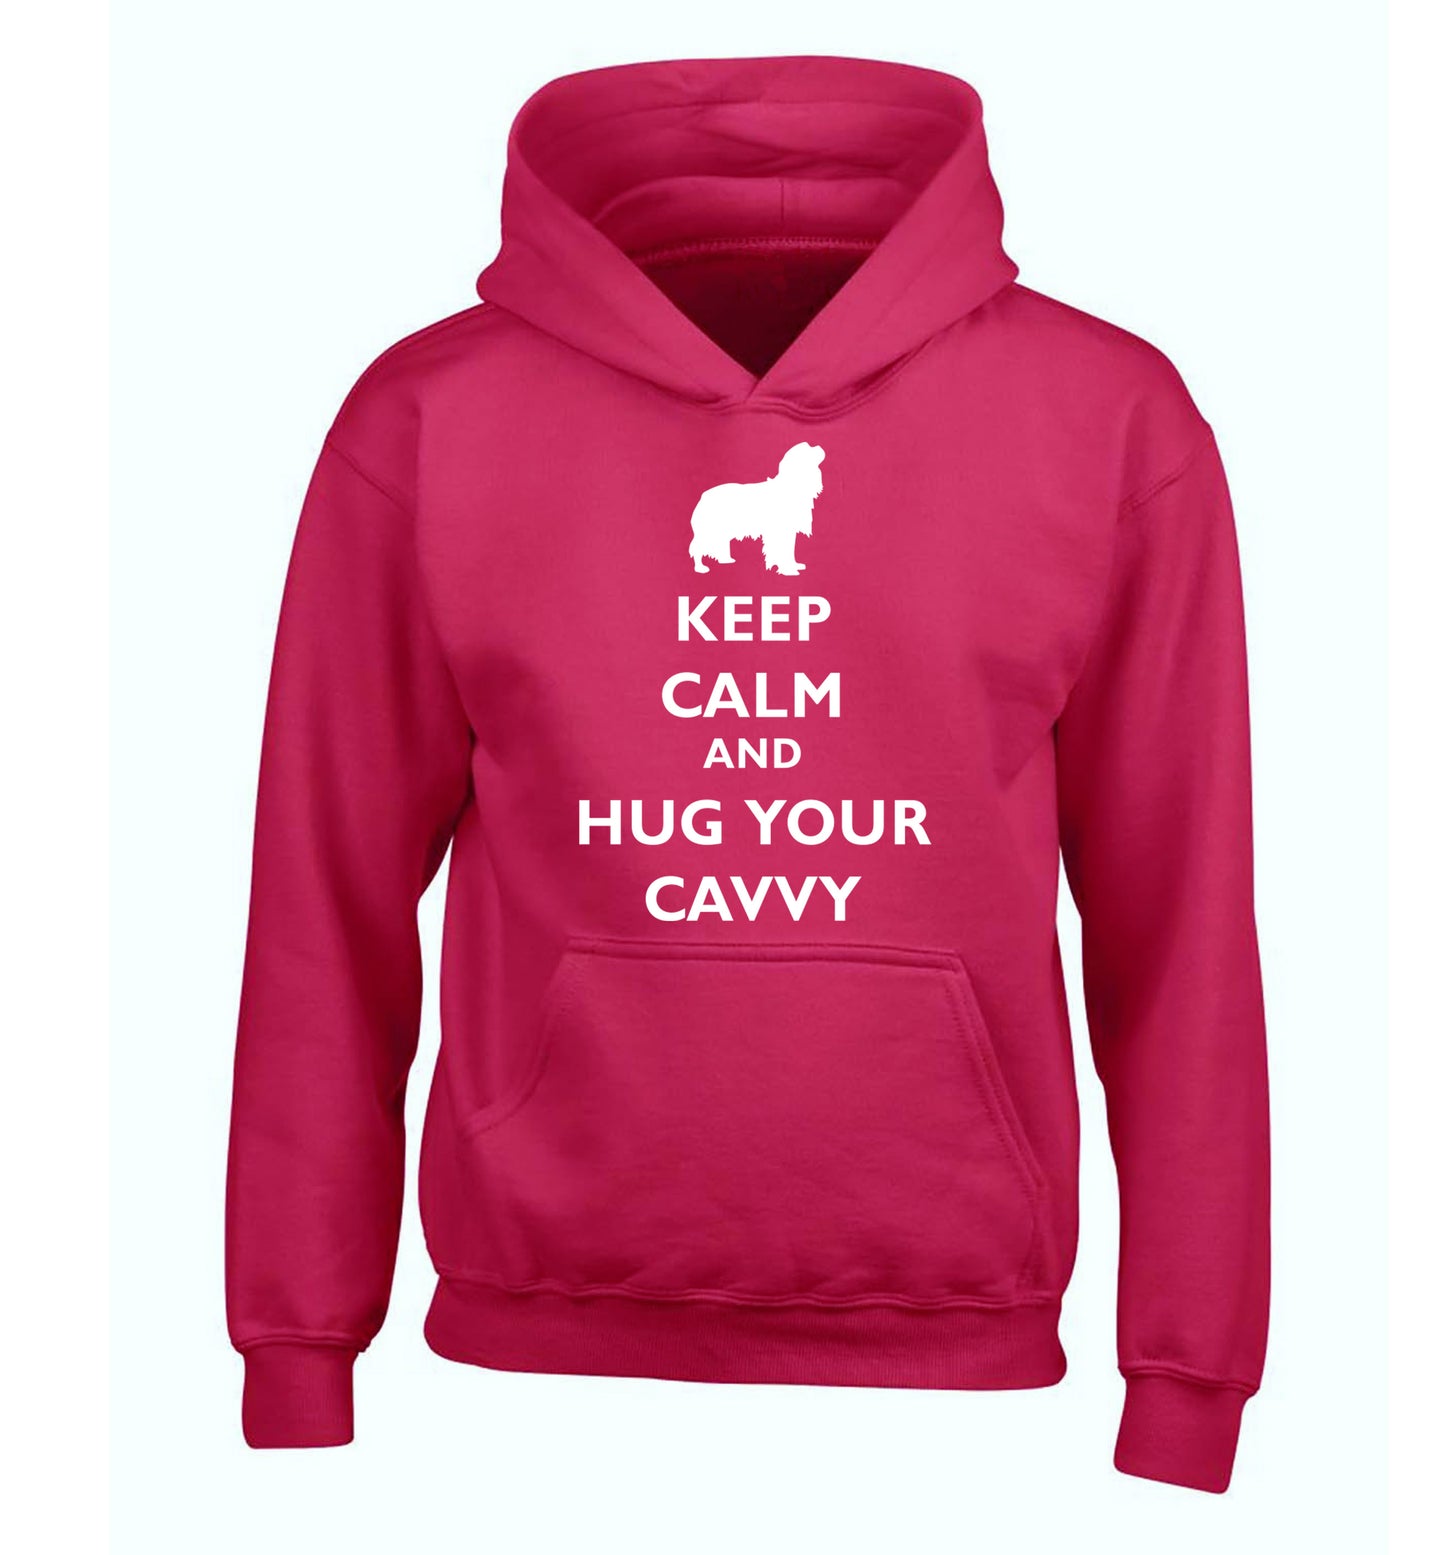 Keep calm and hug your cavvy children's pink hoodie 12-13 Years